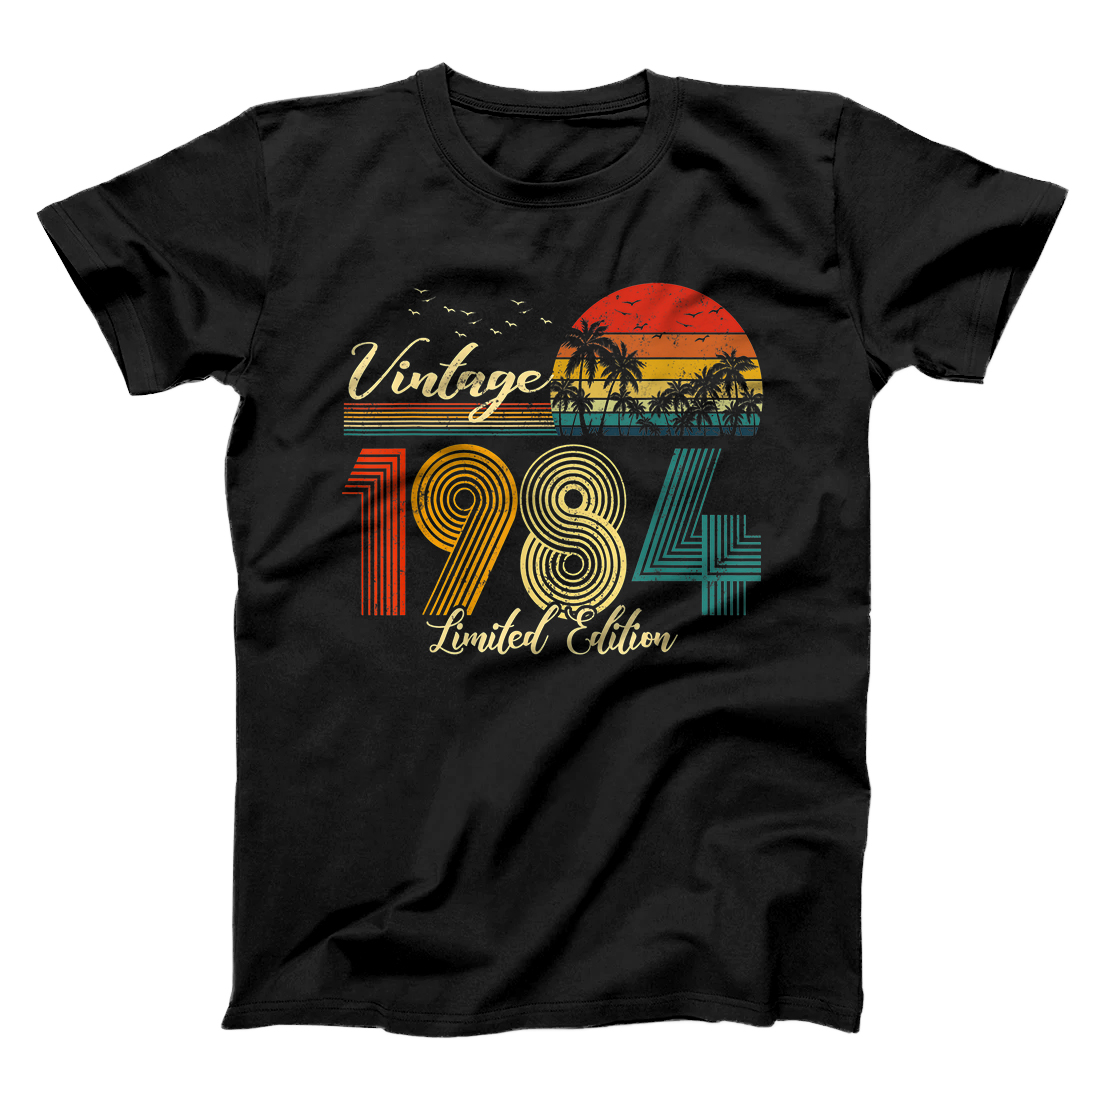 Personalized Vintage 1984 T-Shirt Limited Edition Men Women - 36 Birthday T-Shirt